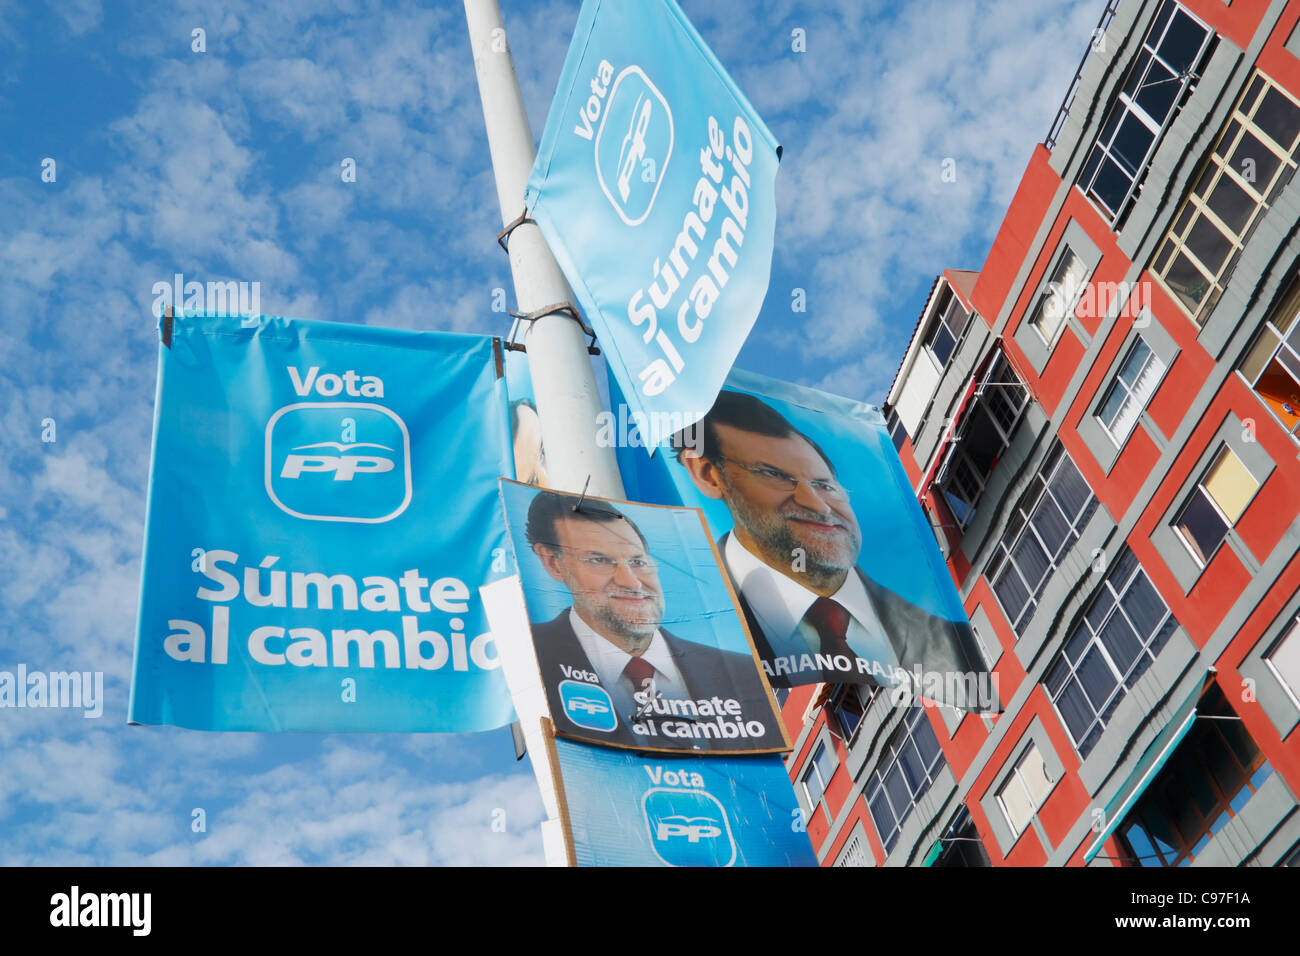 Las Palmas, Gran Canaria, Canary Islands, Spain, 16tth November 2011. Campaign posters for Mariono Rajoy, candidate for the Partido Popular (PP), Spanish general election is on 20th November 2011 Stock Photo